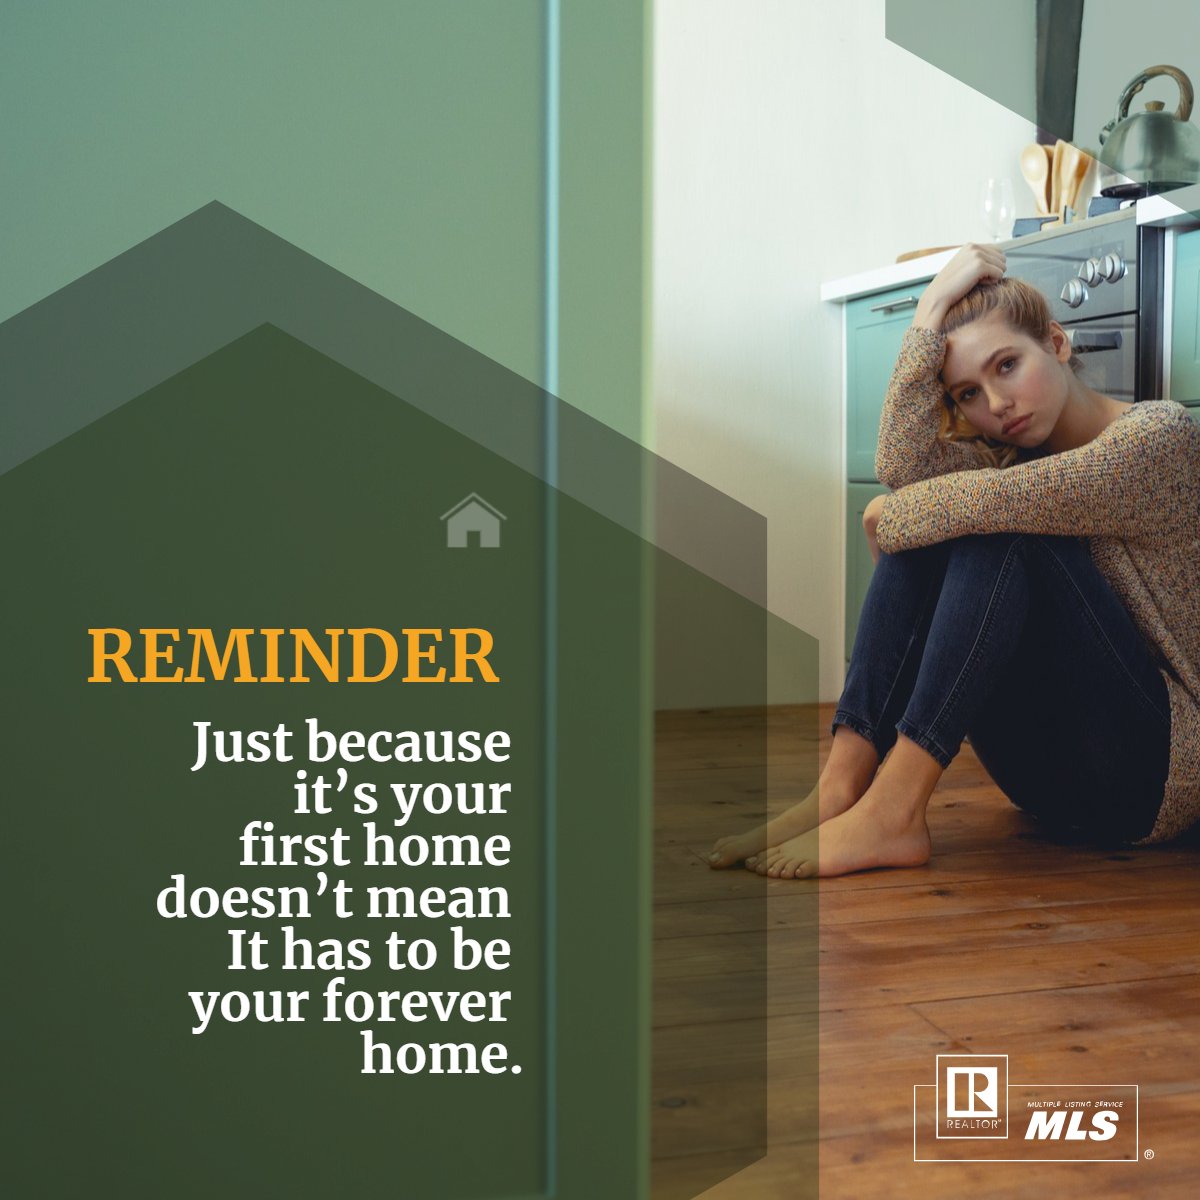 💭 Just like life, homes are always changing and evolving.

Whether it's your first home or your future dream house, cherish the memories you make along the way.

#LifeJourney